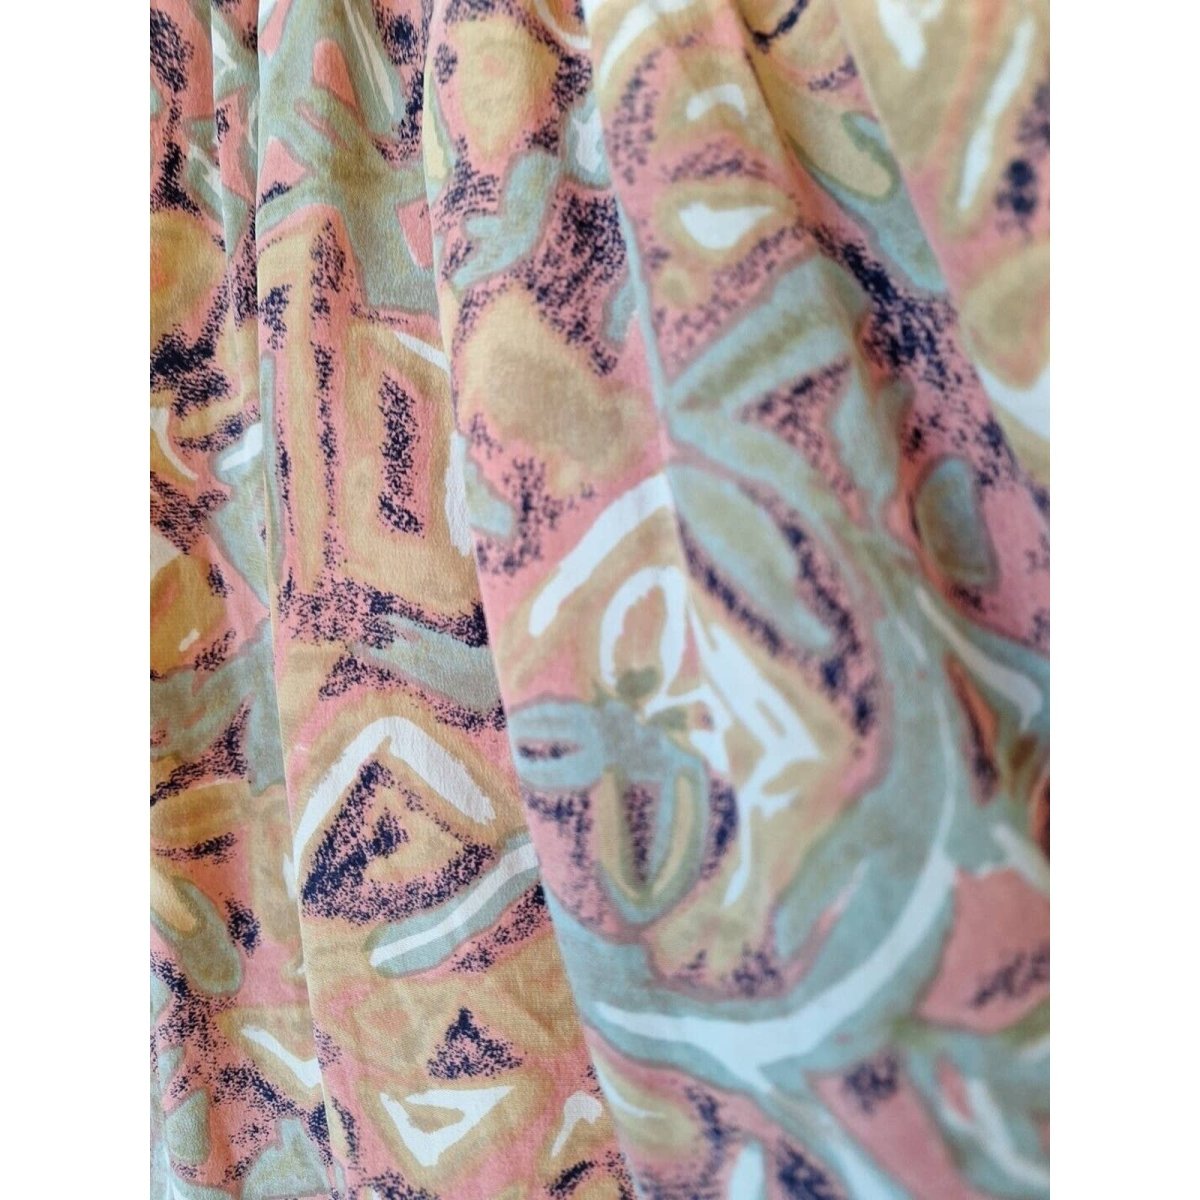 Vintage 80s Silk Abstract Print Skirt Women Size 14 - themallvintage The Mall Vintage